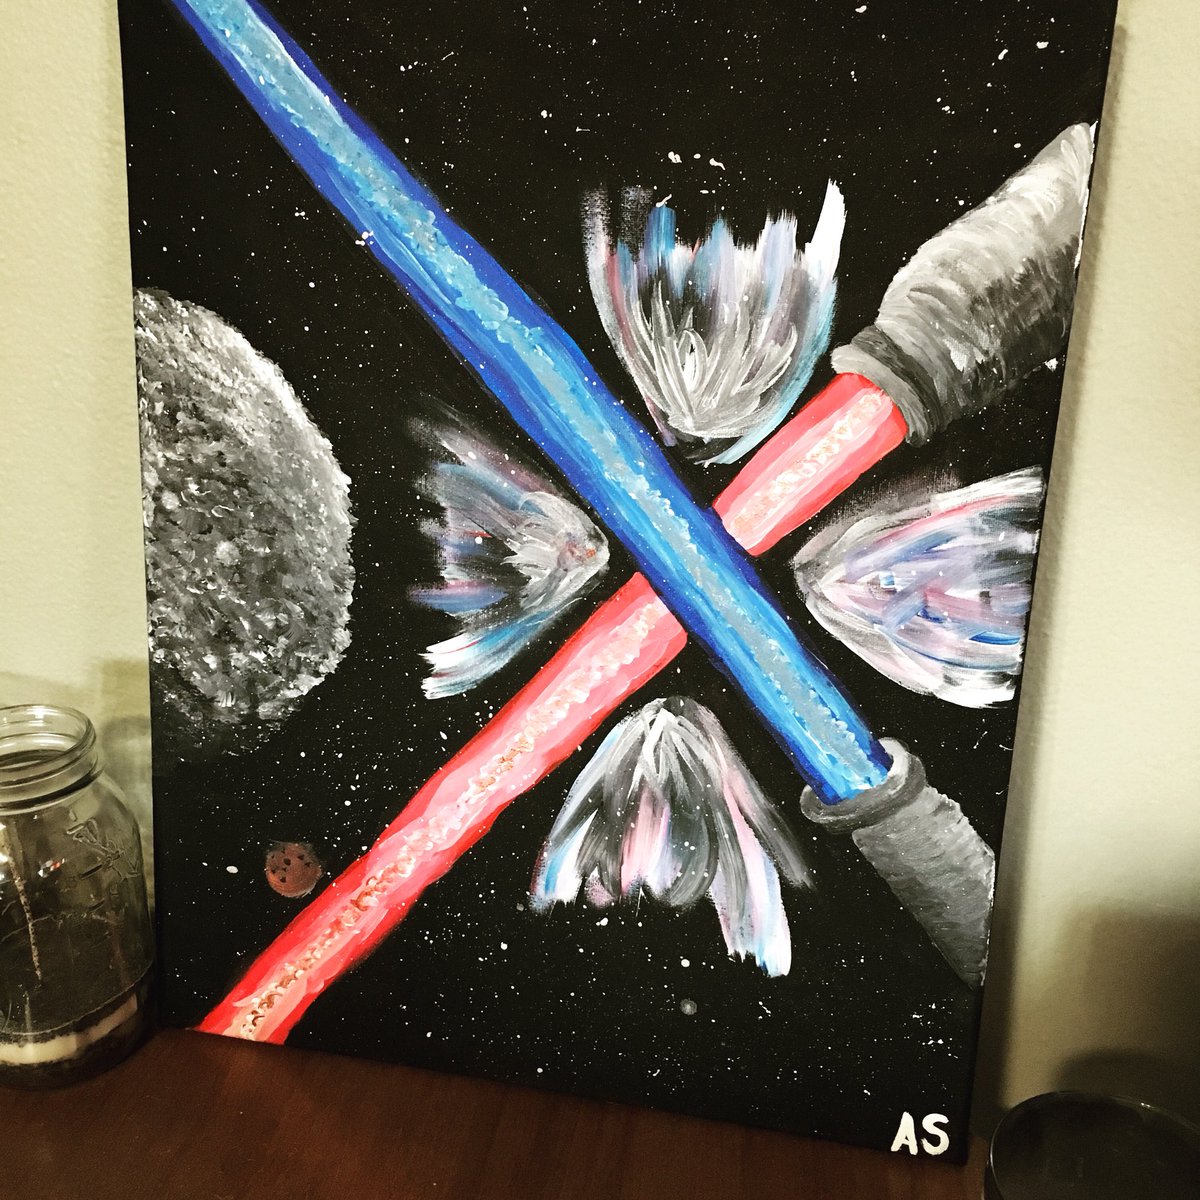 A little something something that I painted up ❤️💙 #starwarspainting #dorklife #mytalent #artwork #icanpaint